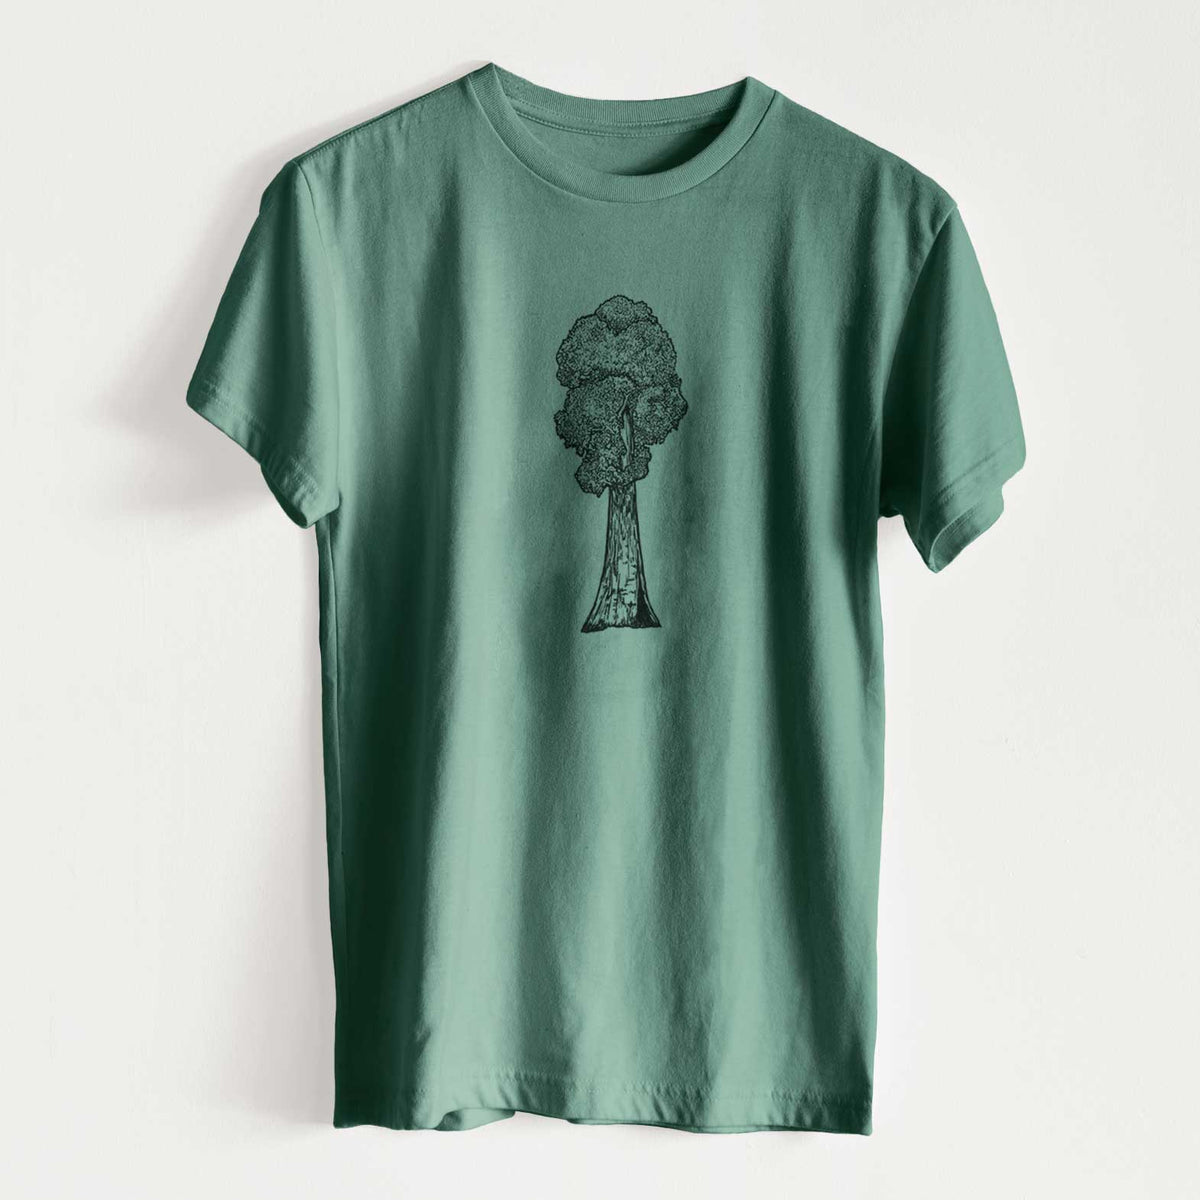 Sequoia - Unisex Recycled Eco Tee  - CLOSEOUT - FINAL SALE